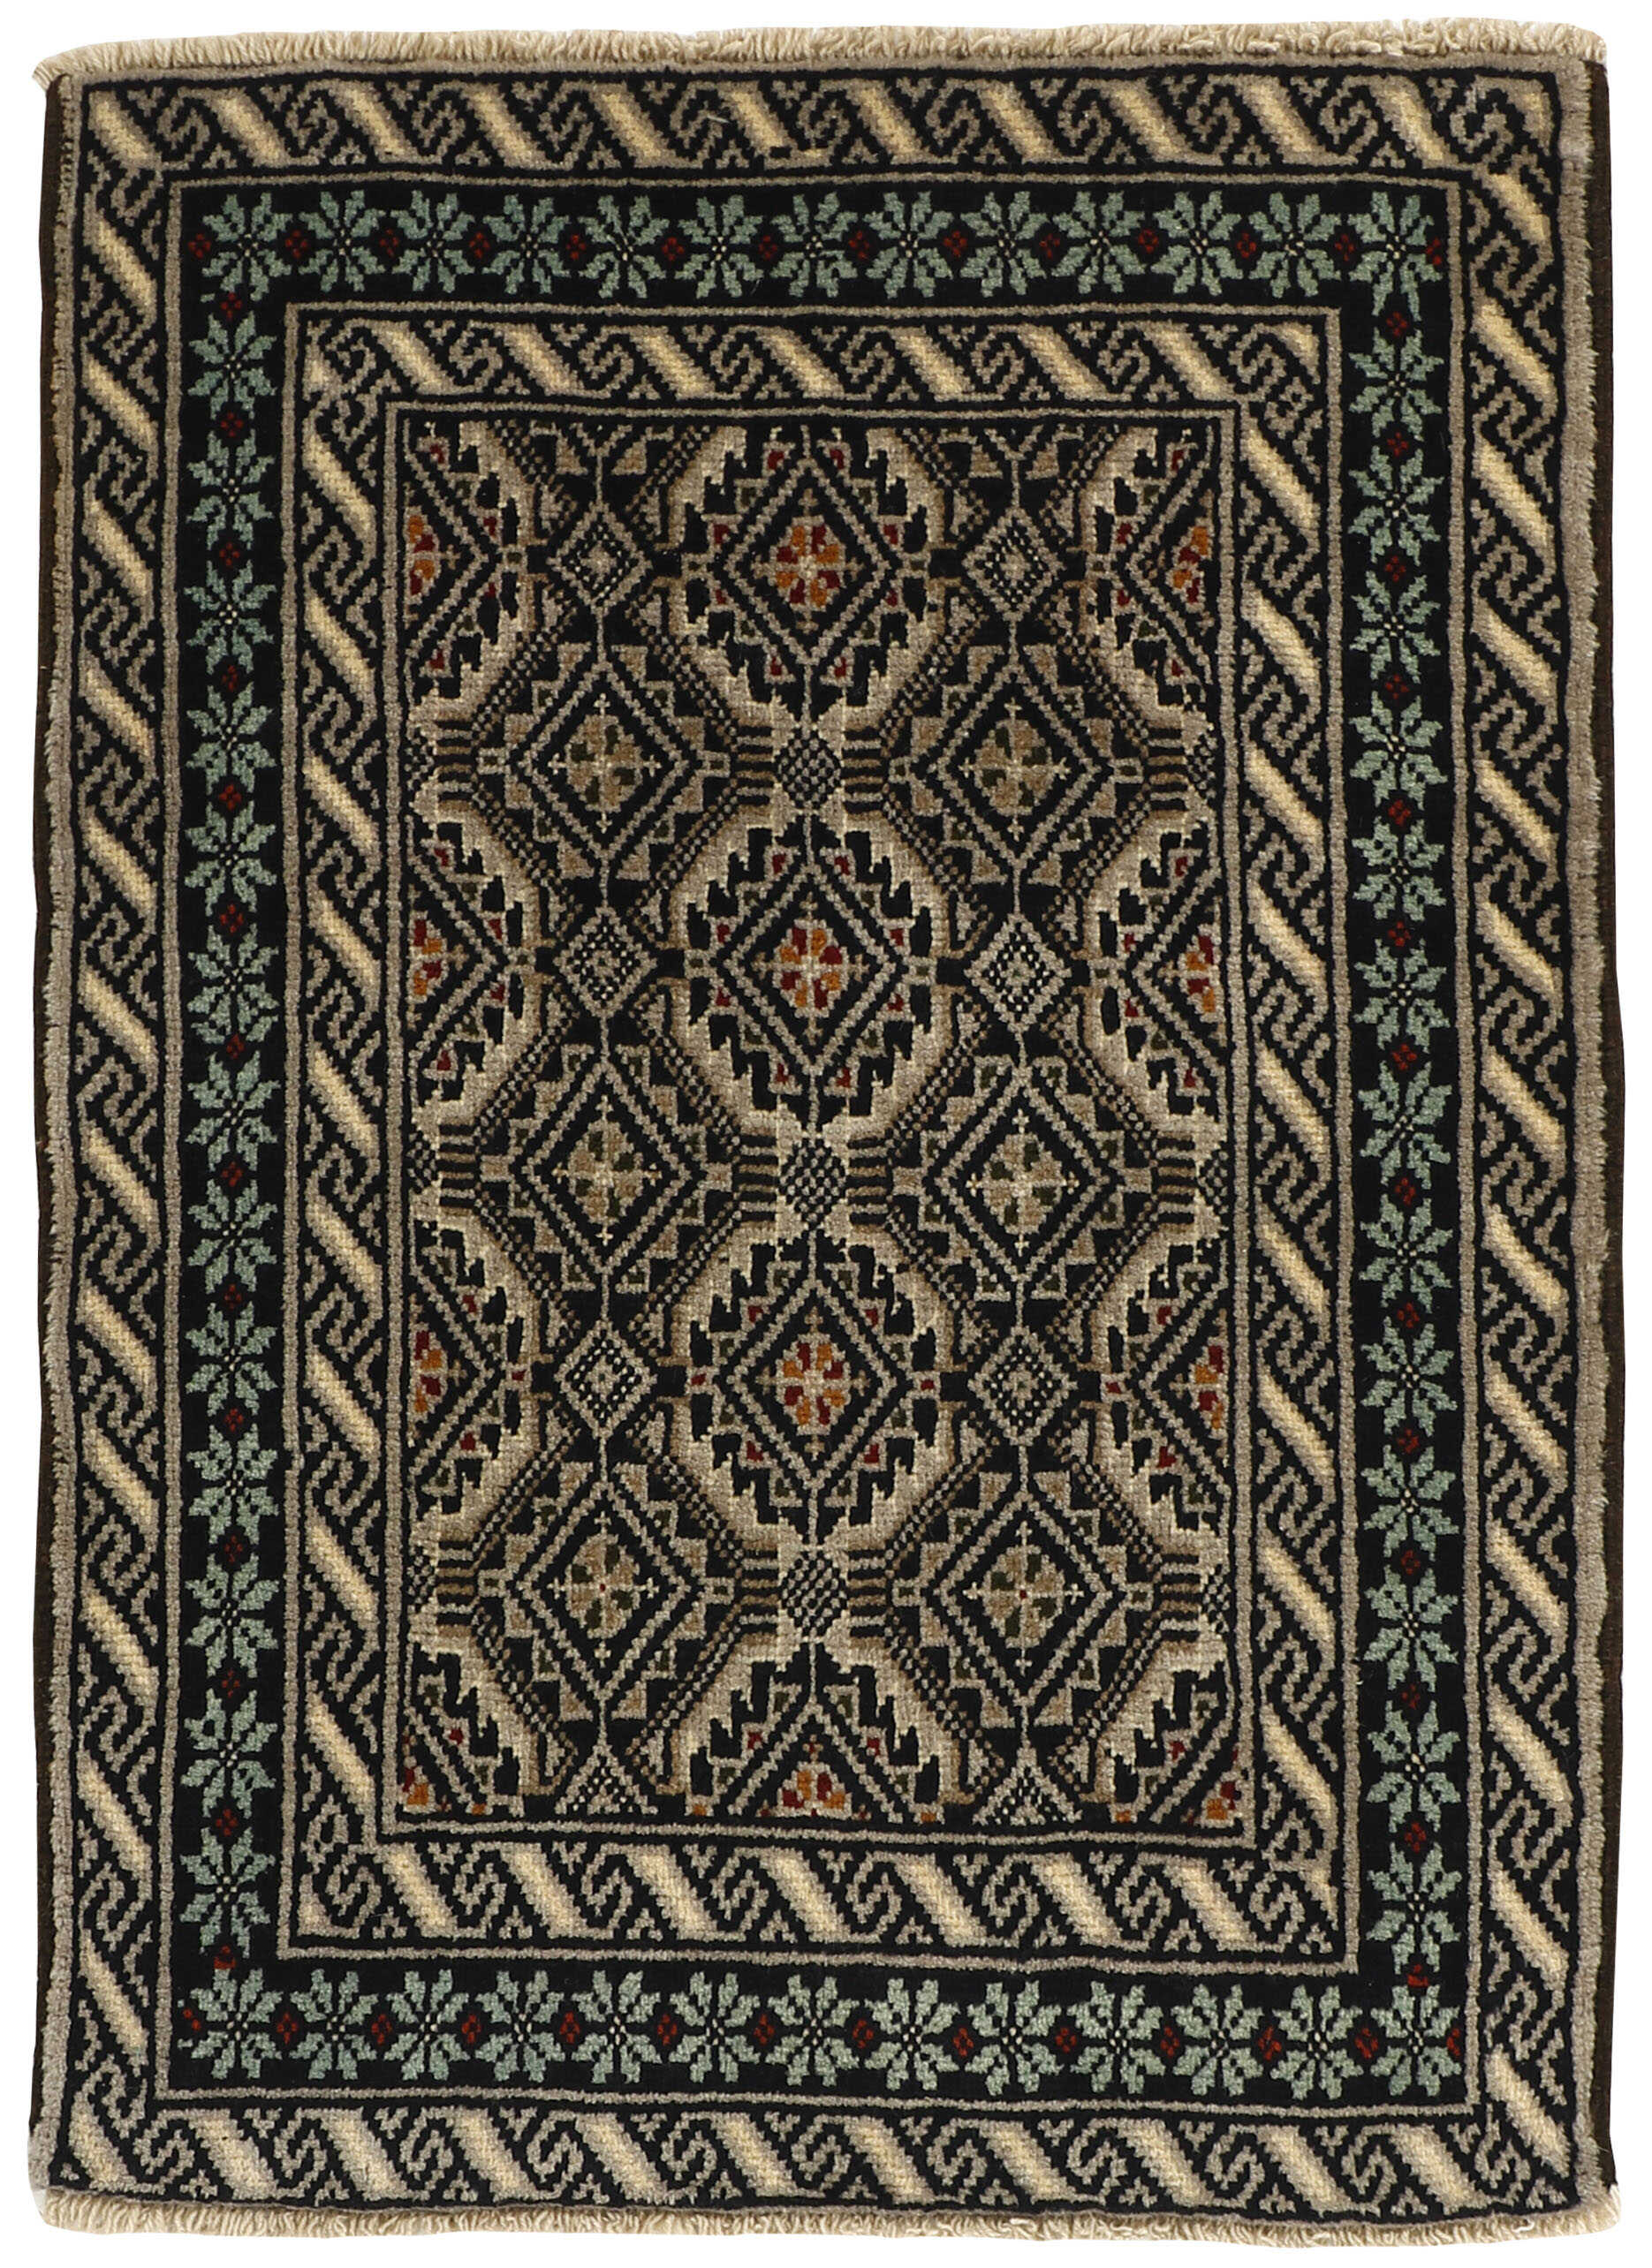 Beige Persian wool rug with traditional design